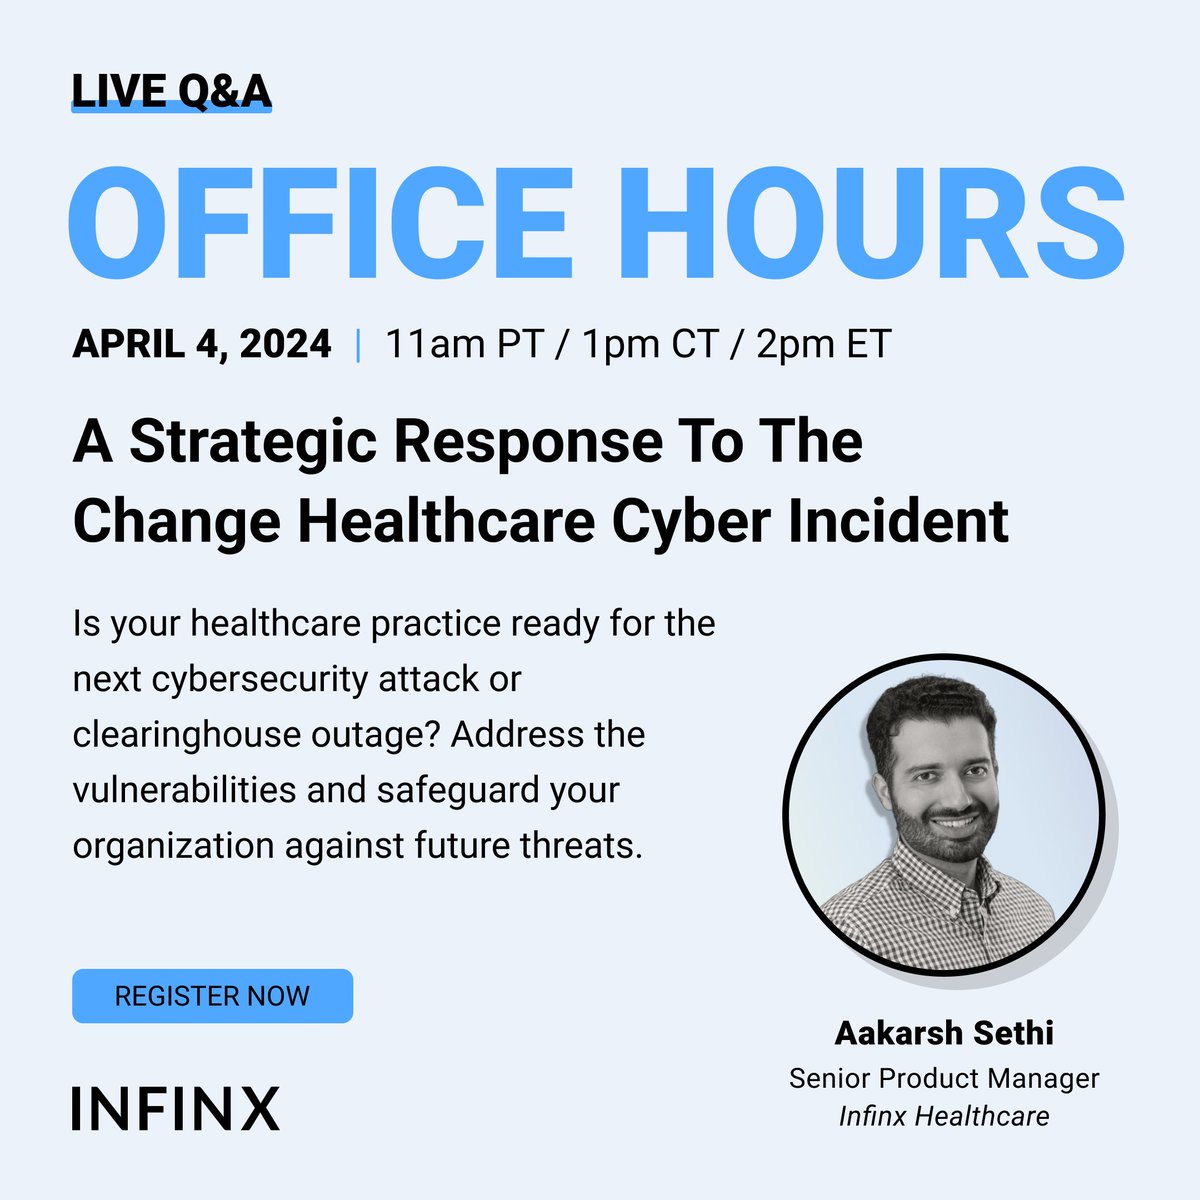 It’s not too late to join us for today’s Office Hours! Aakarsh Sethi, Senior Product Manager at Infinx, will cover the ins and outs of protecting your organization against another catastrophic attack. hubs.li/Q02rS93T0 #Cybersecurity #ChangeHealthcare #AI #ML